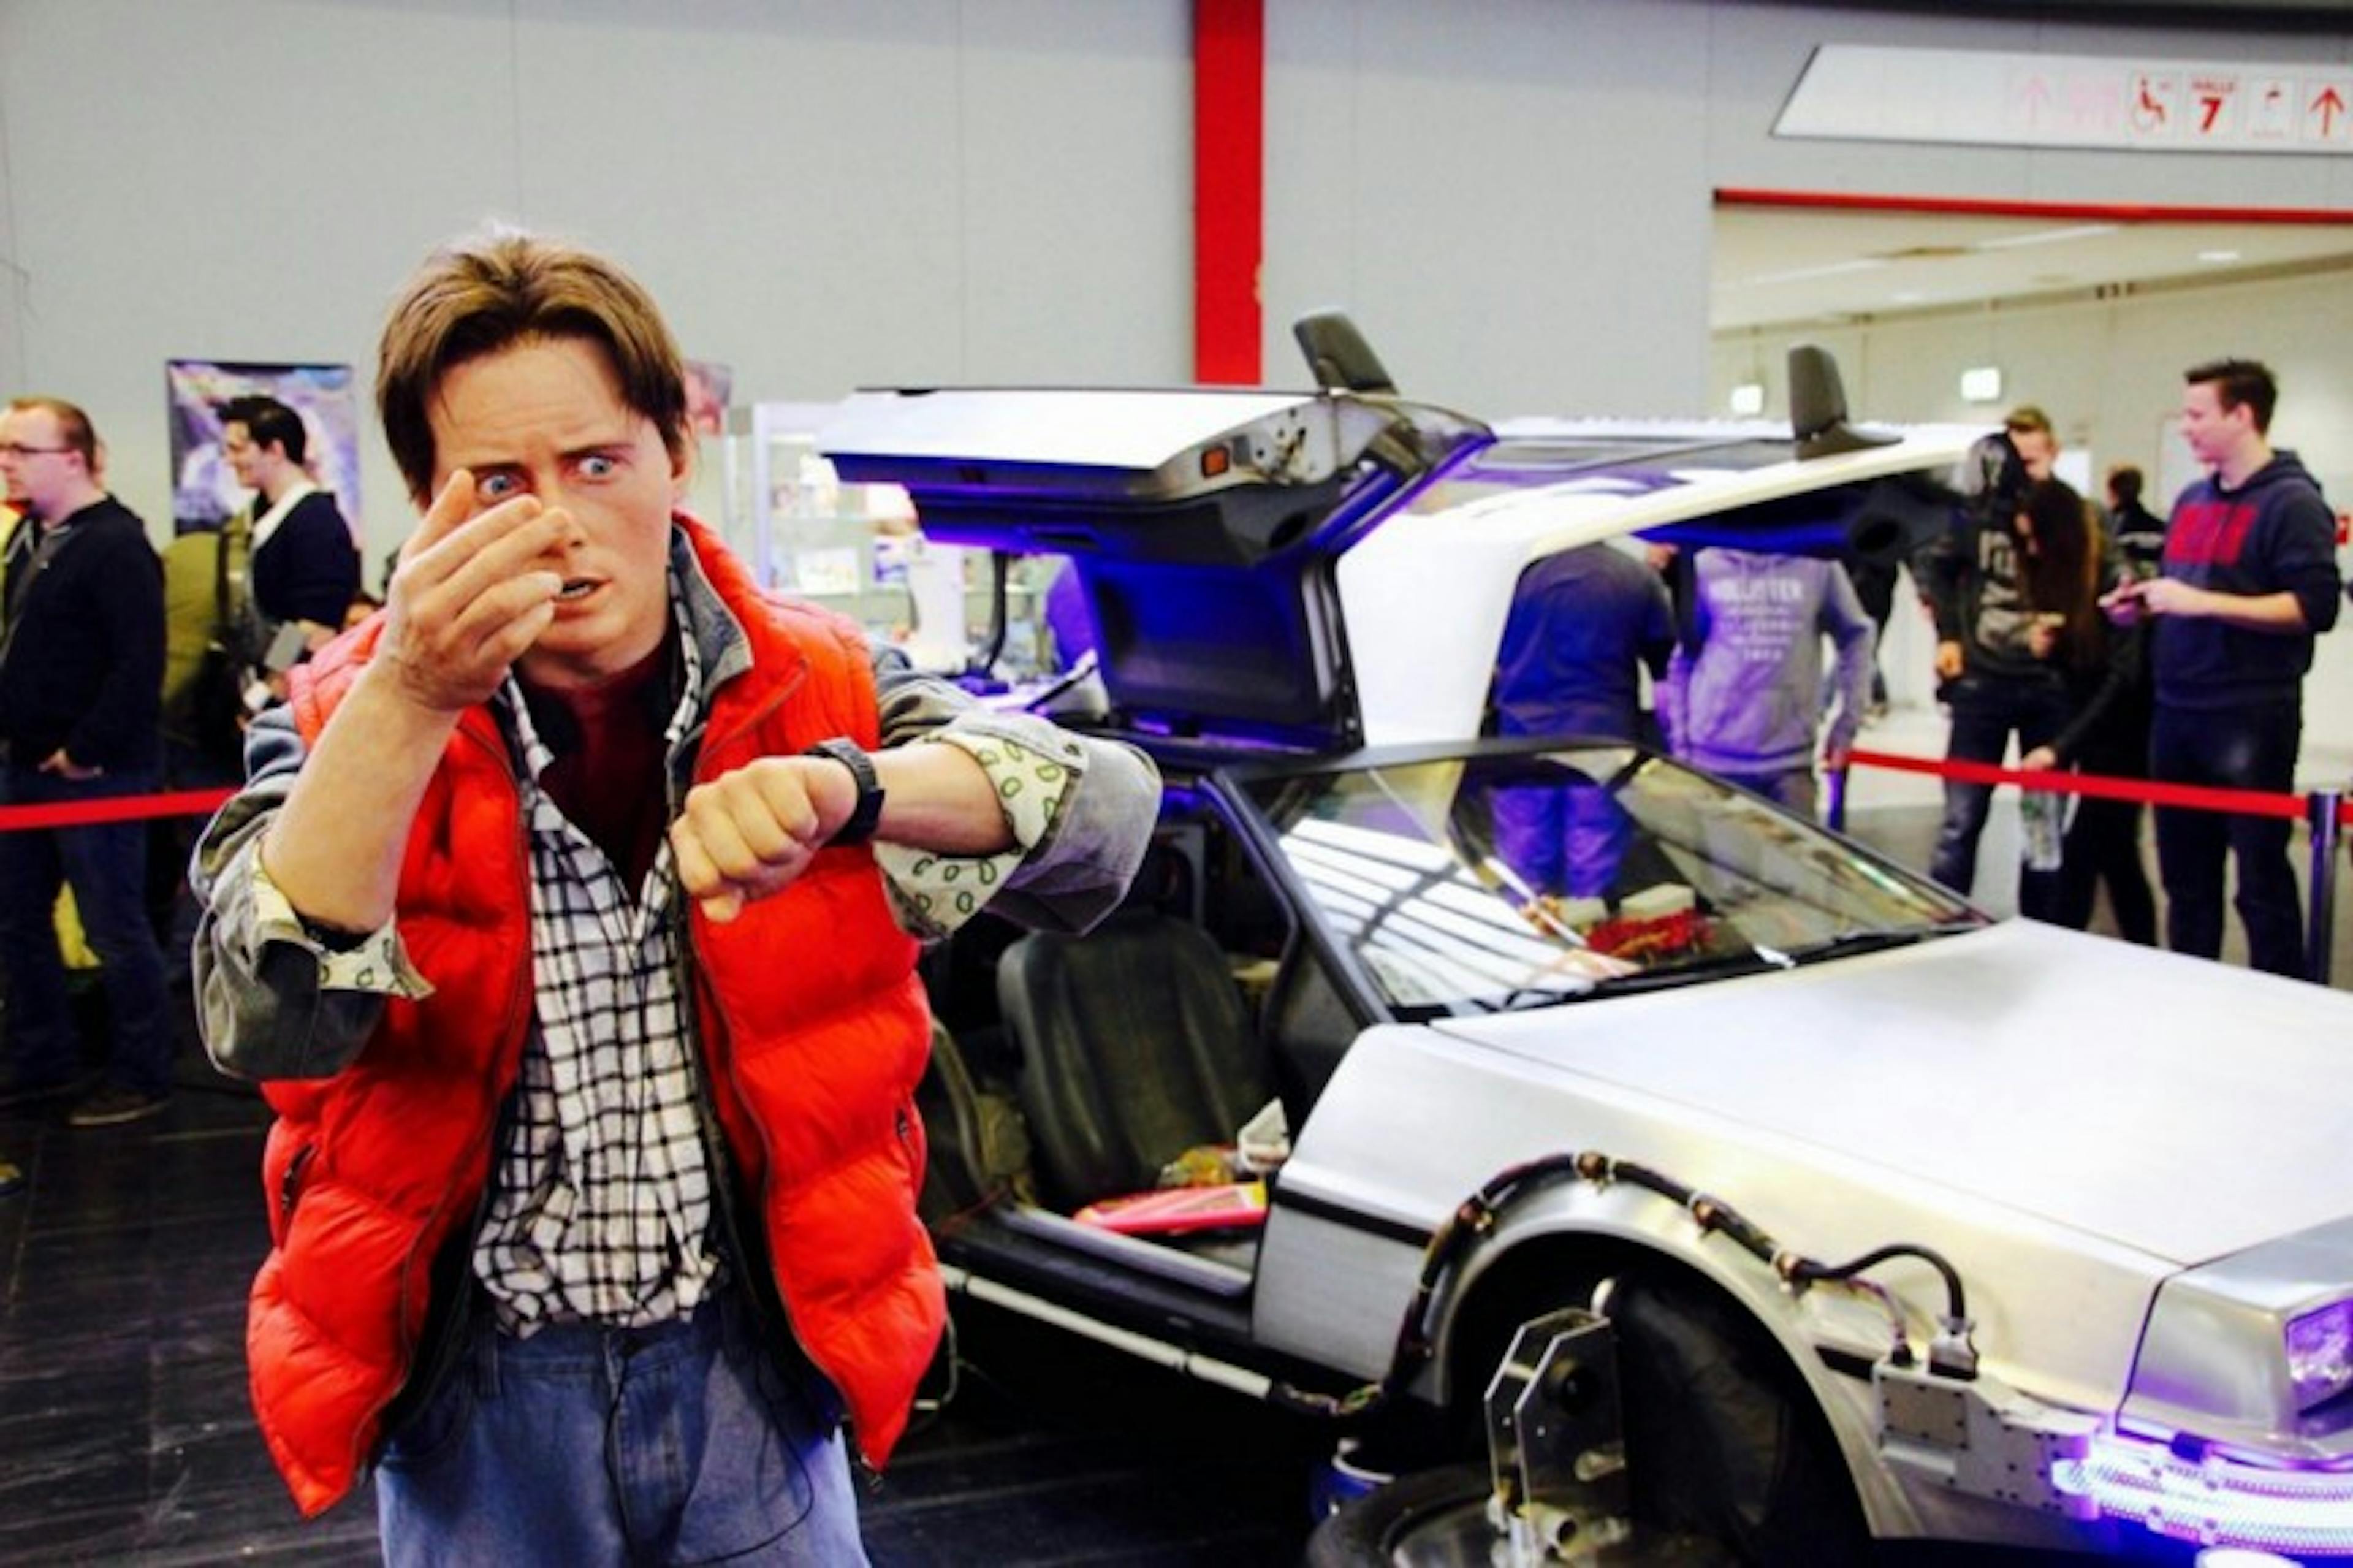 back to the future still image of the dalorian and marty mcfly